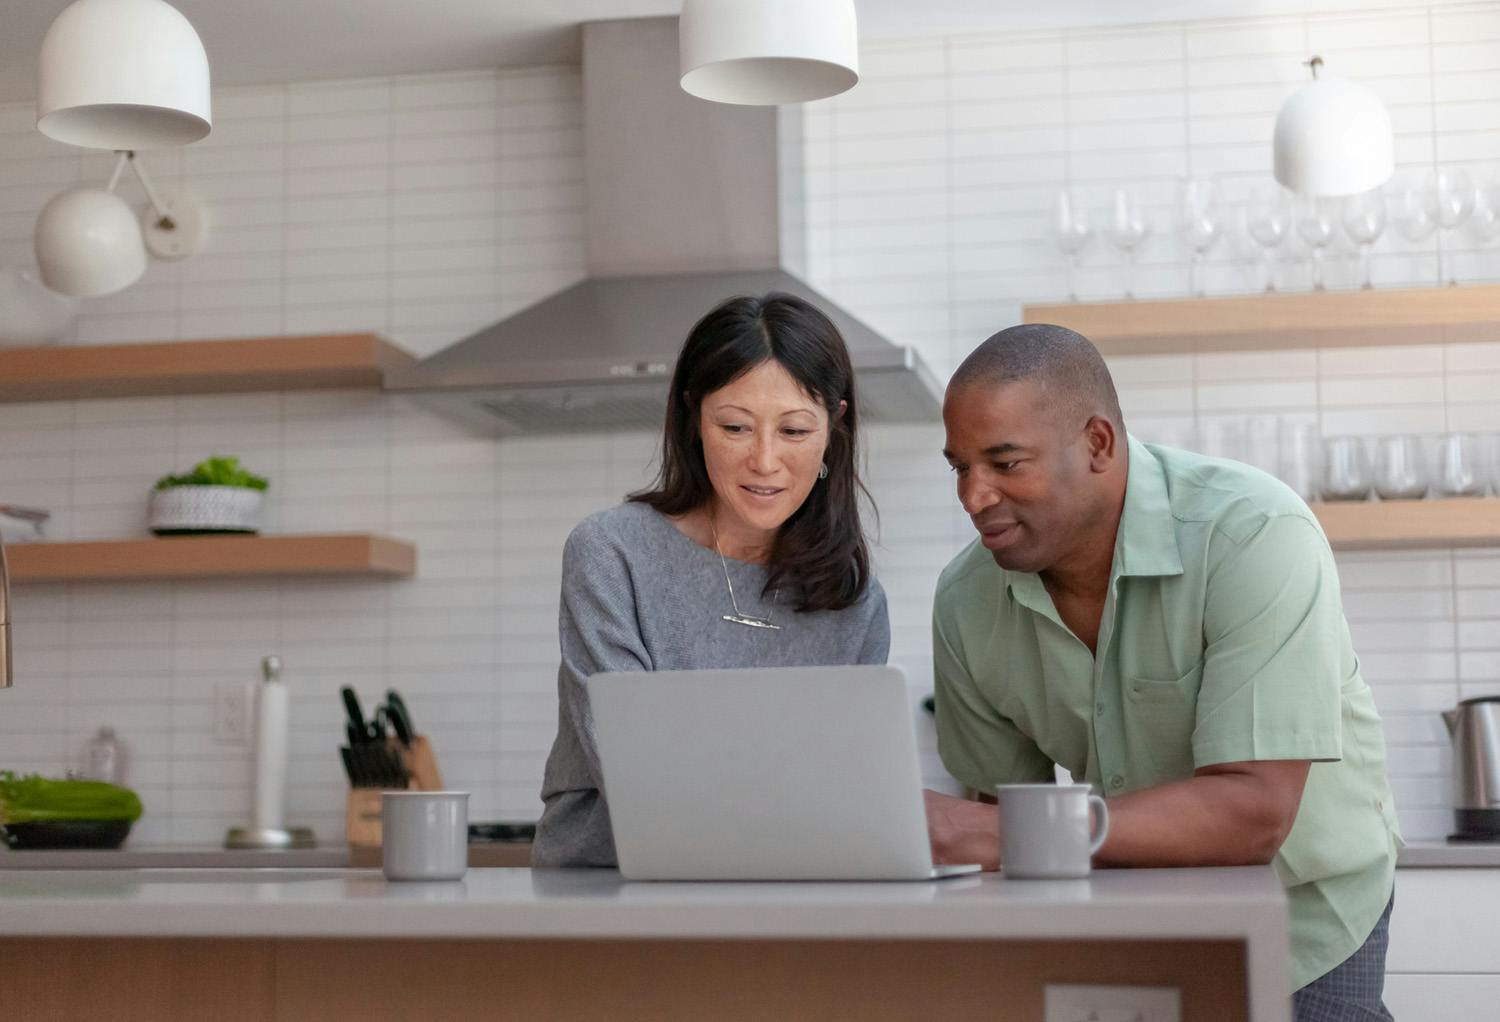 Man and woman looking at a laptop in a kitchen